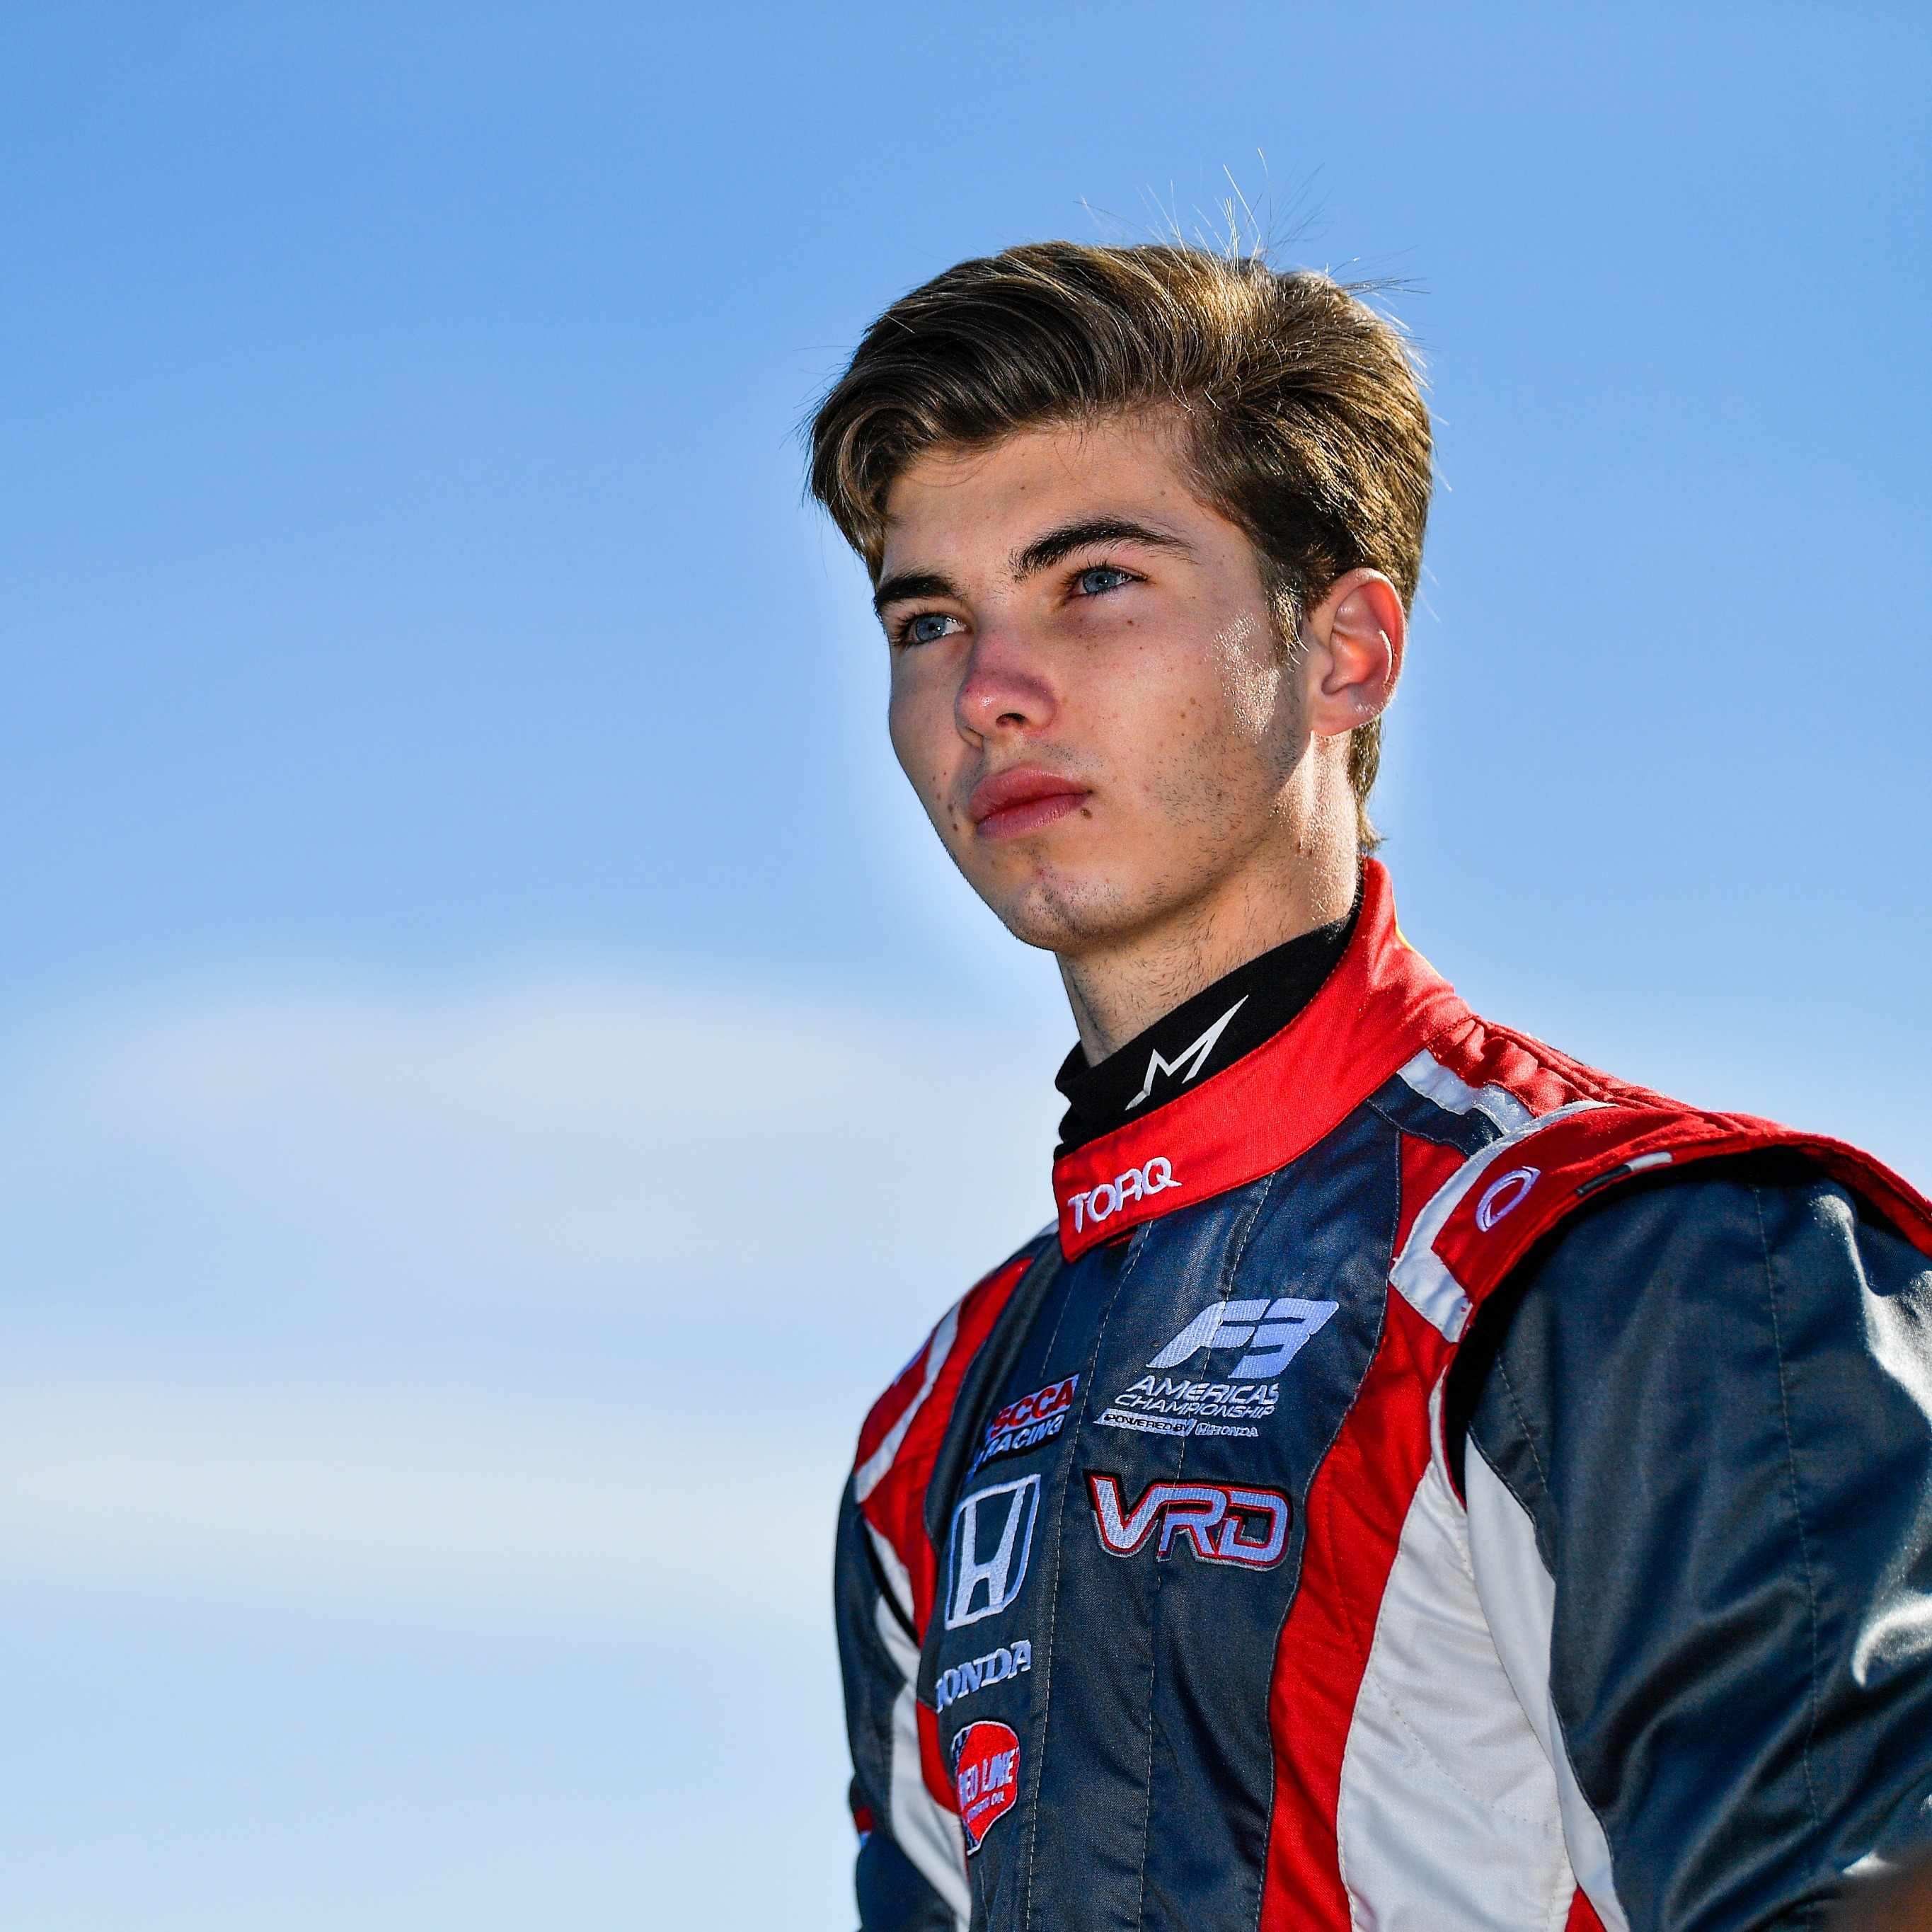 Otto talks this weekends F3 series race at Road America with driver John Paul Southern Jr